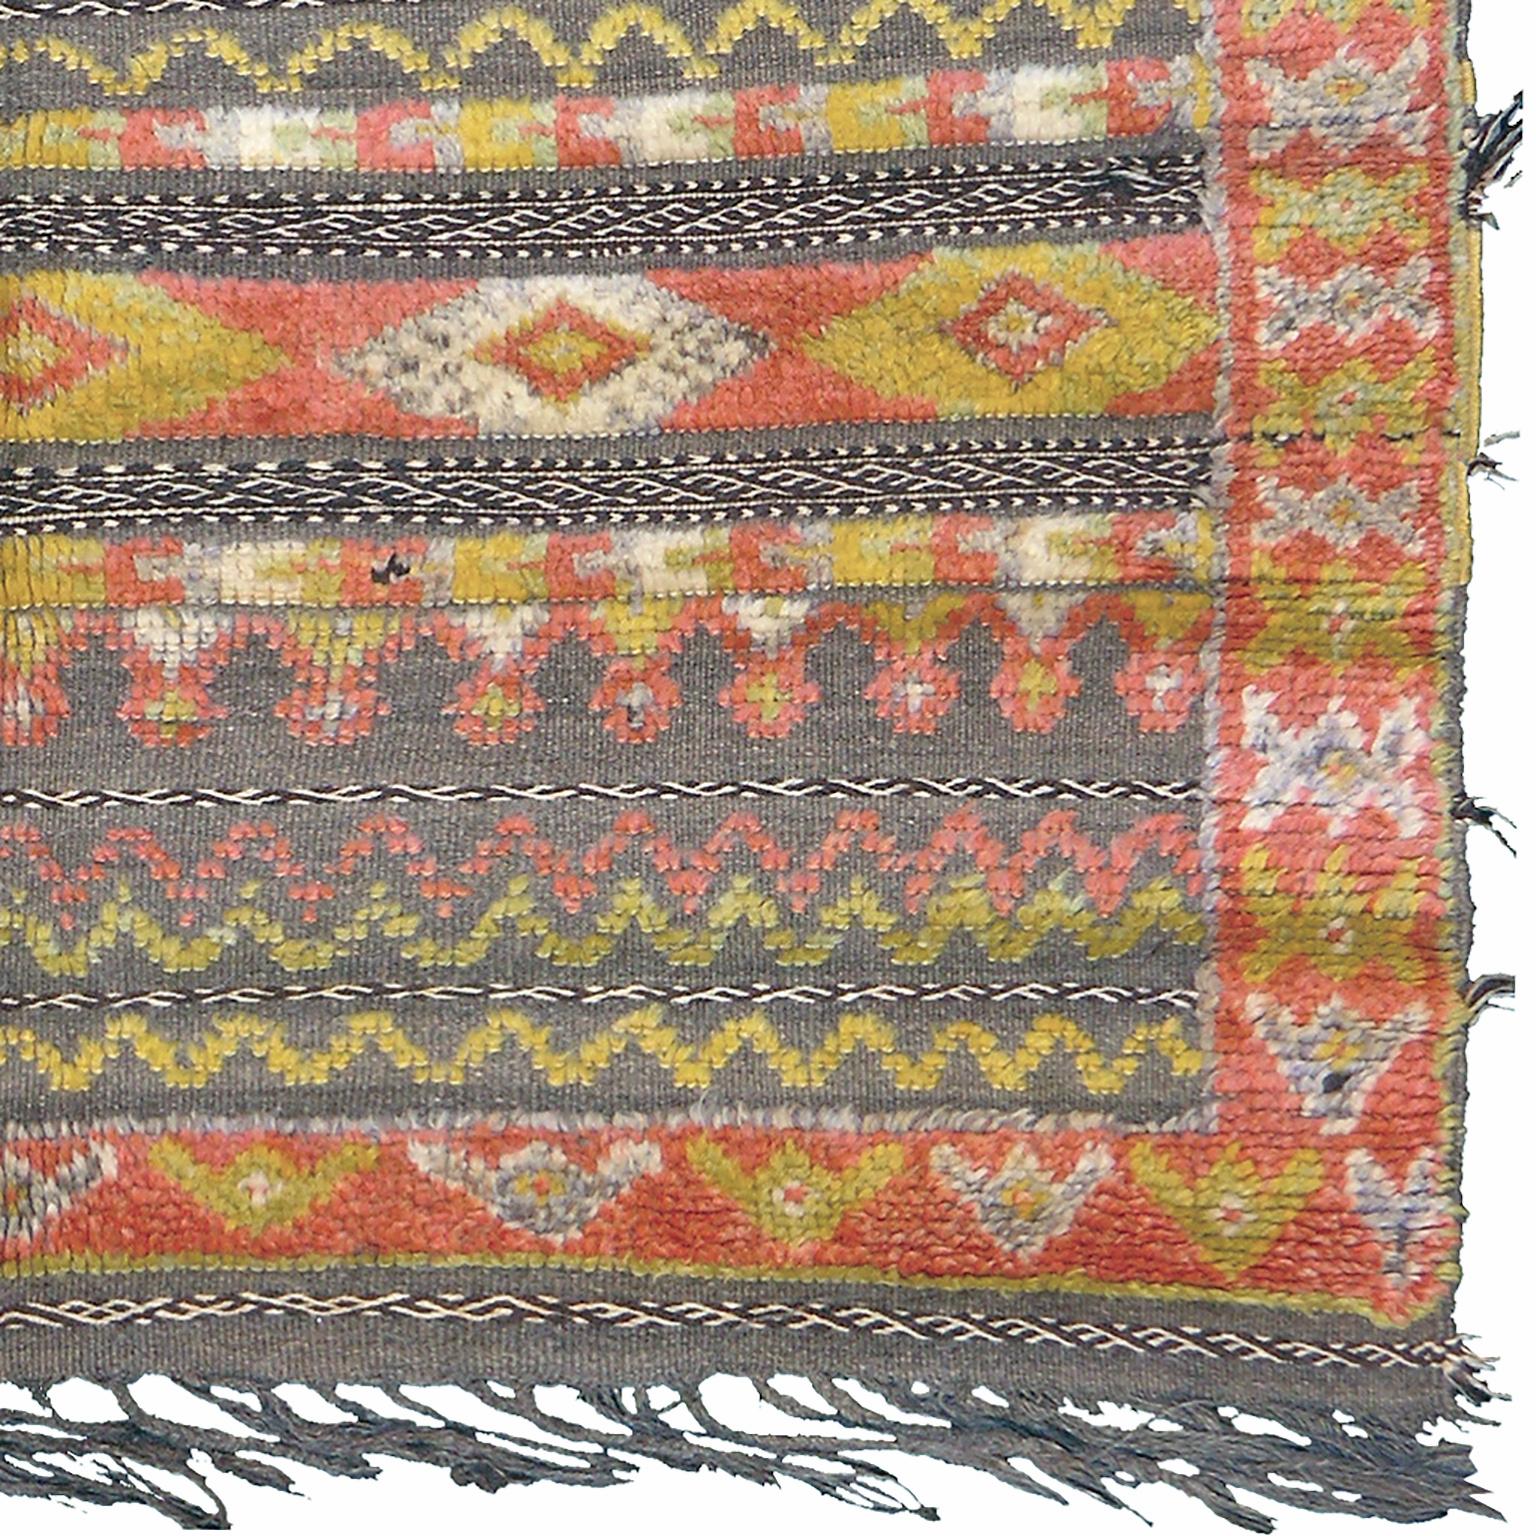 Hand-Woven Mid-20th Century Moroccan Berber Rug For Sale